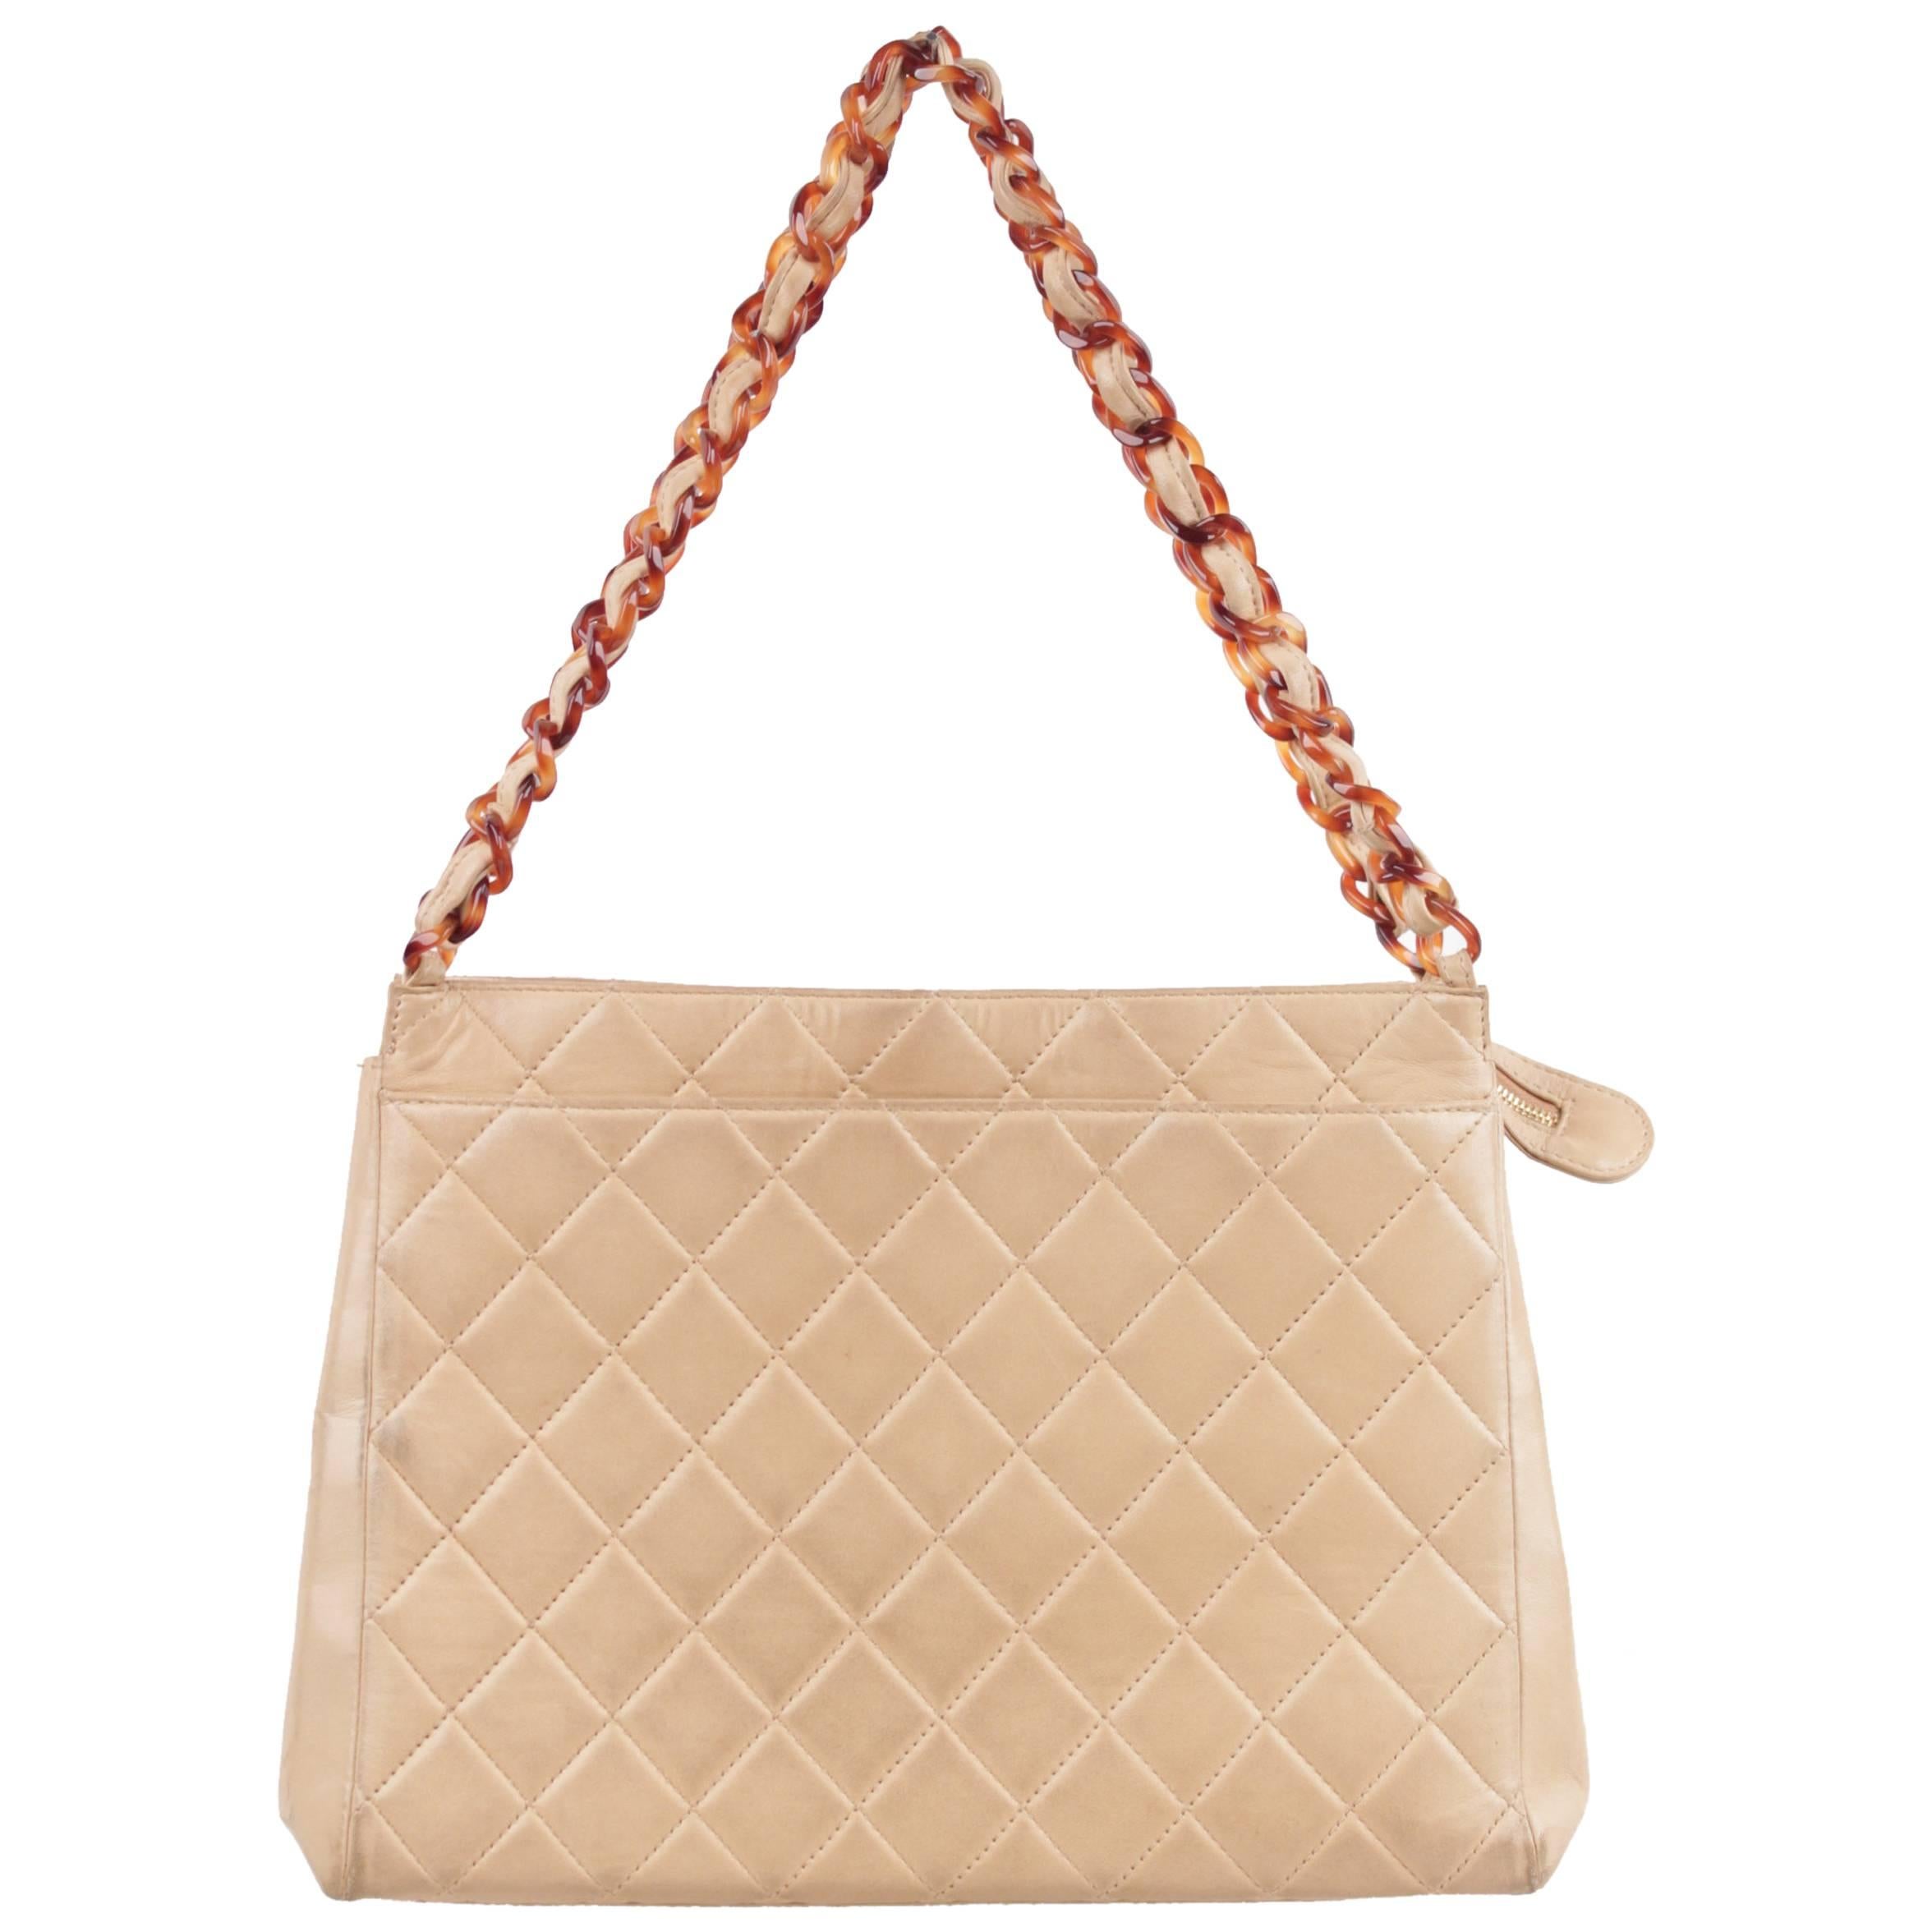 CHANEL Vintage Beige Quilted Leather LUCITE Chain TOTE